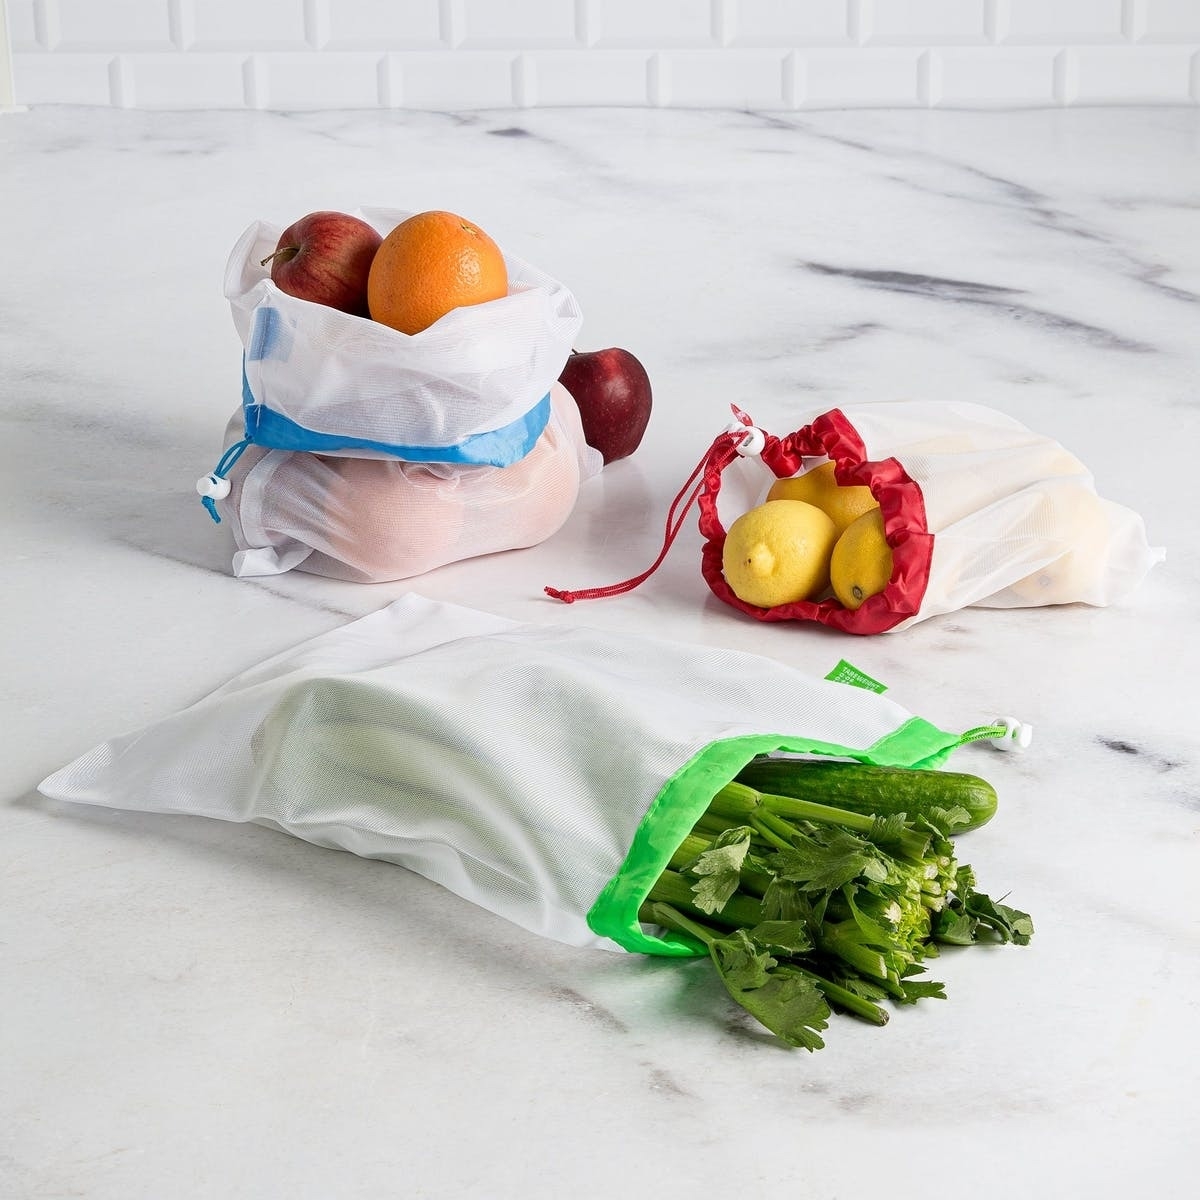 Mesh bags with fruit and vegetables inside.